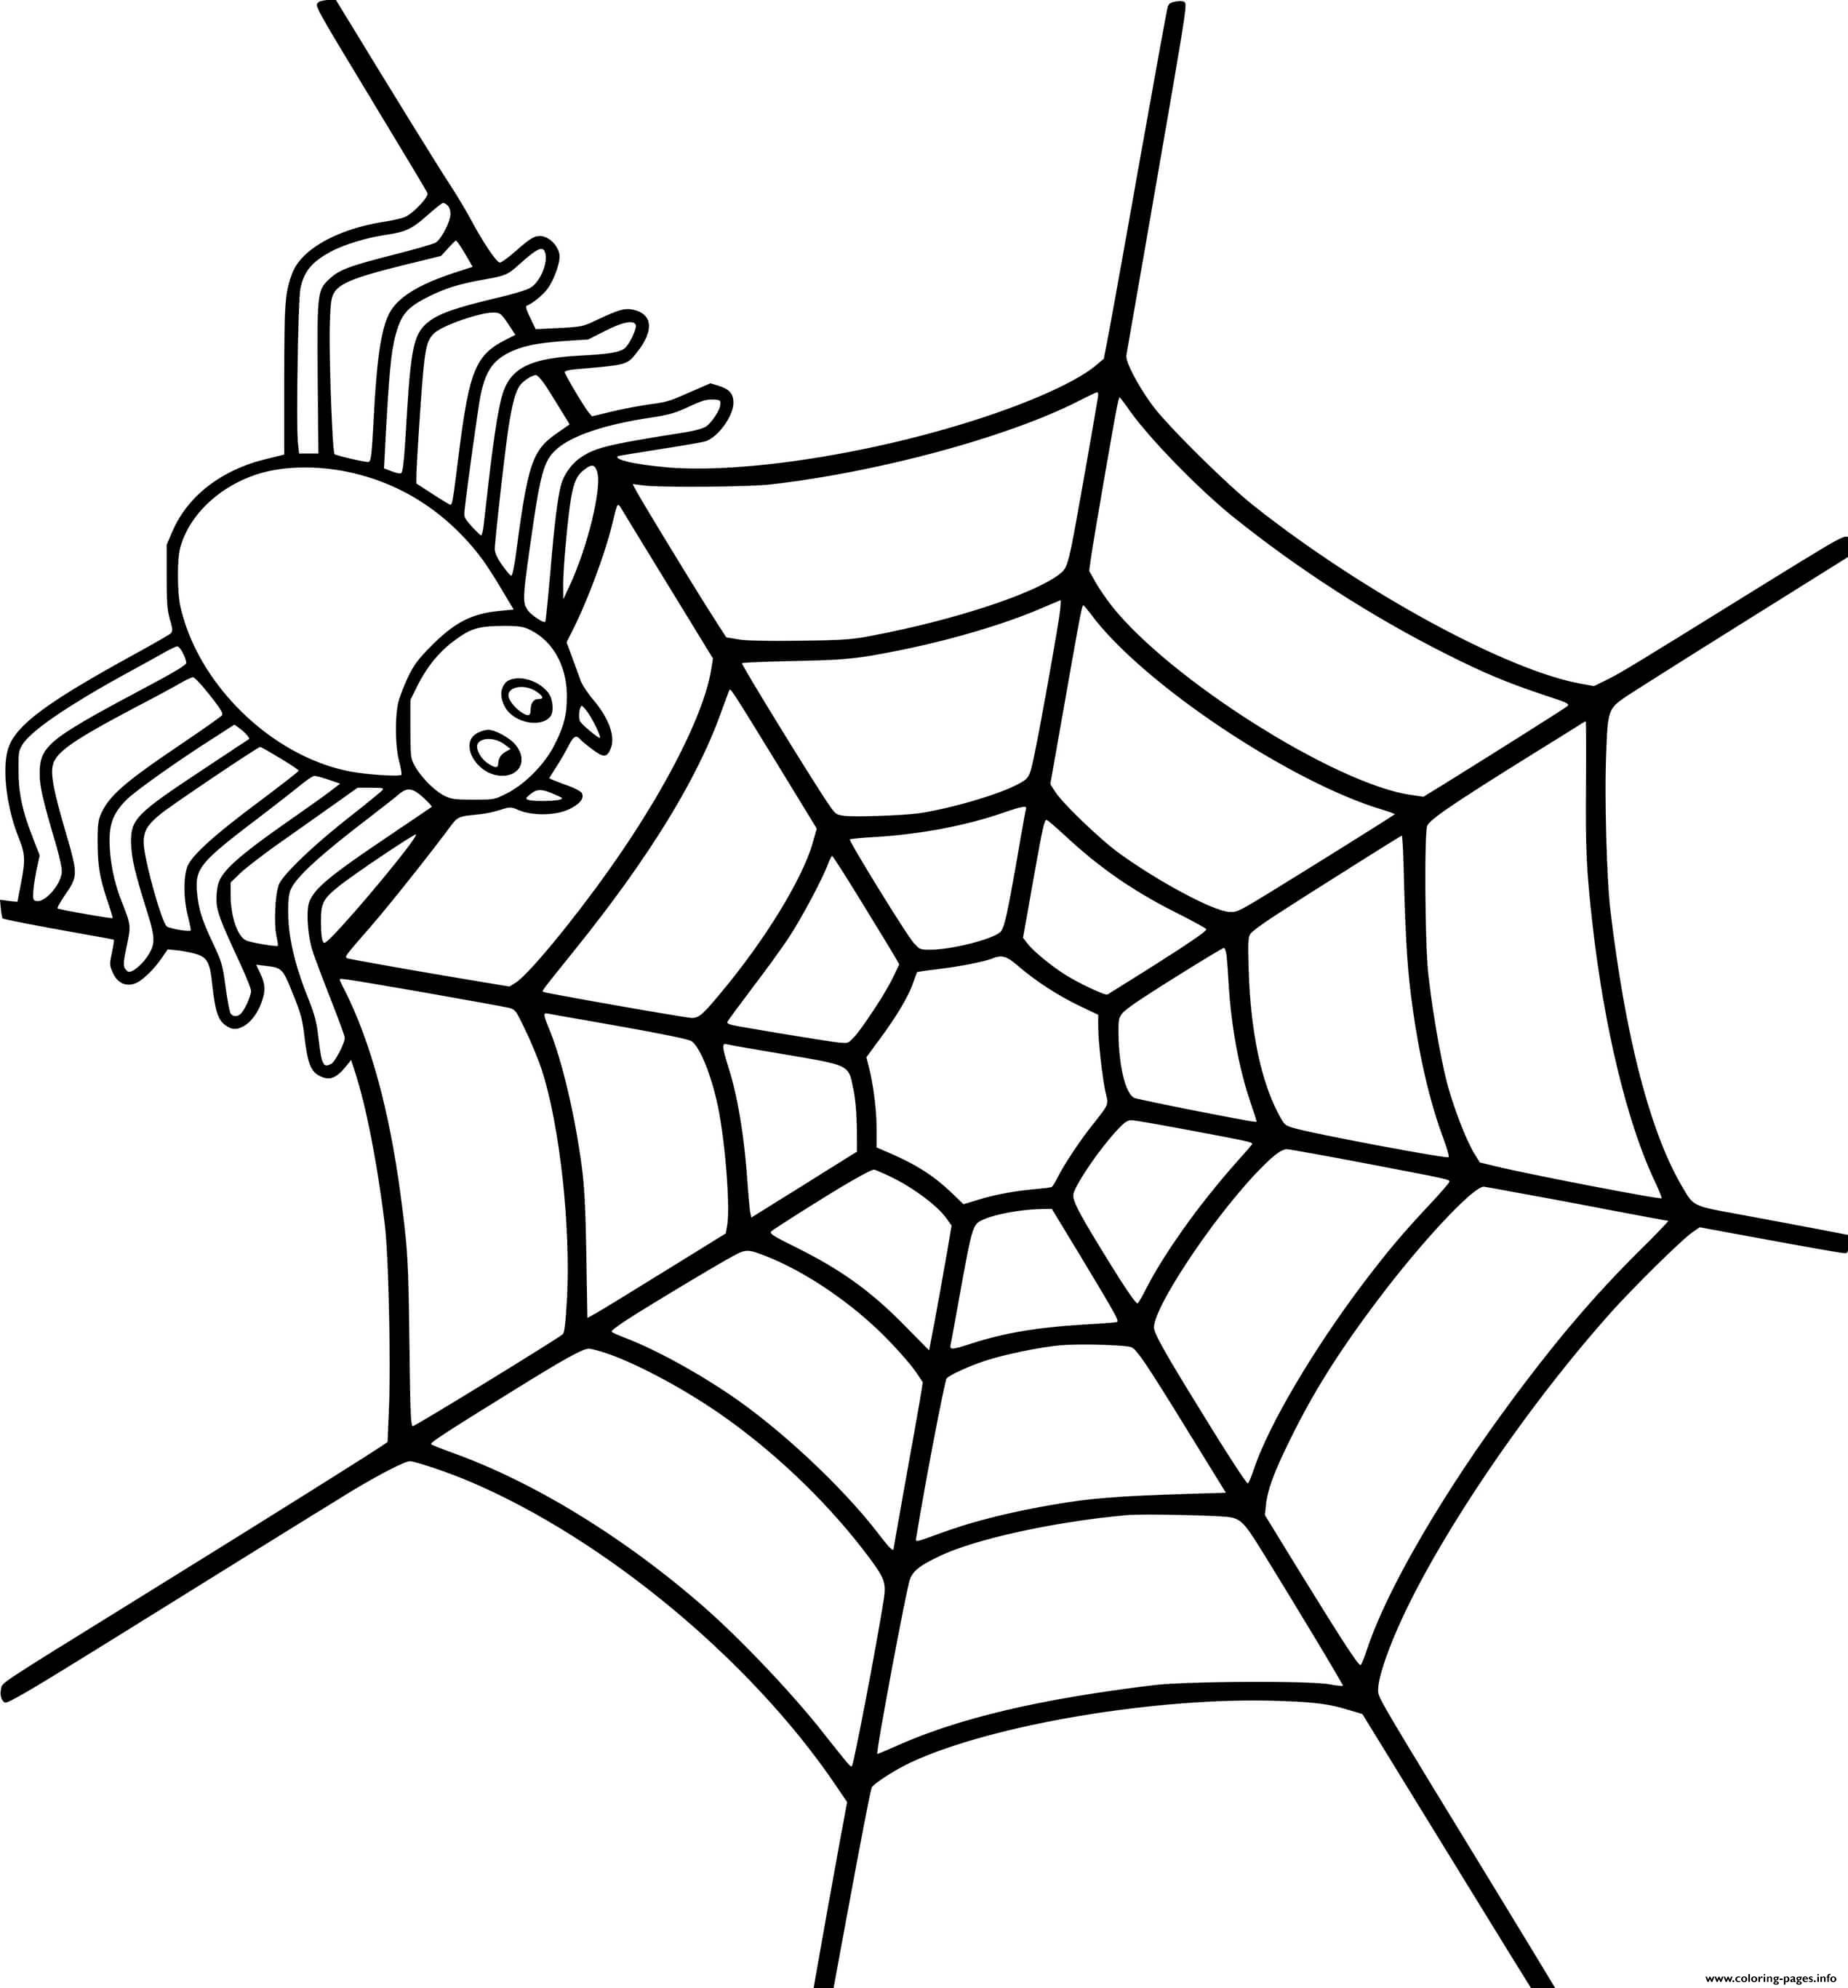 Easy Spider On The Web coloring